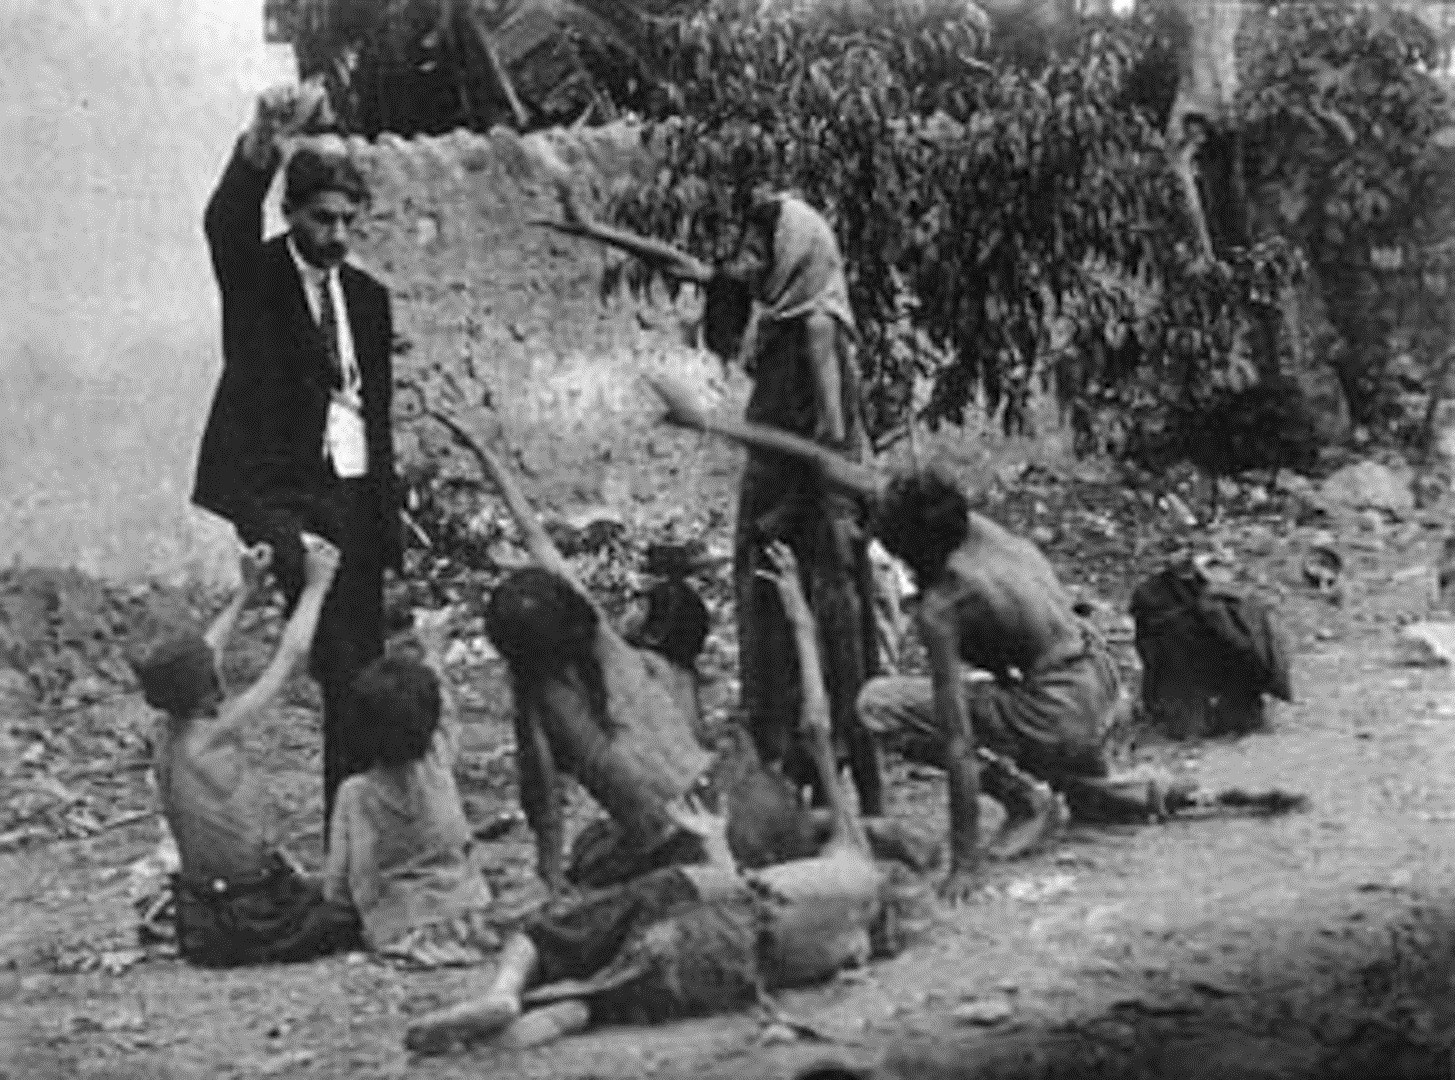 14 - Turkish official teasing starved Armenian children by showing bread during the Armenian Genocide 1915